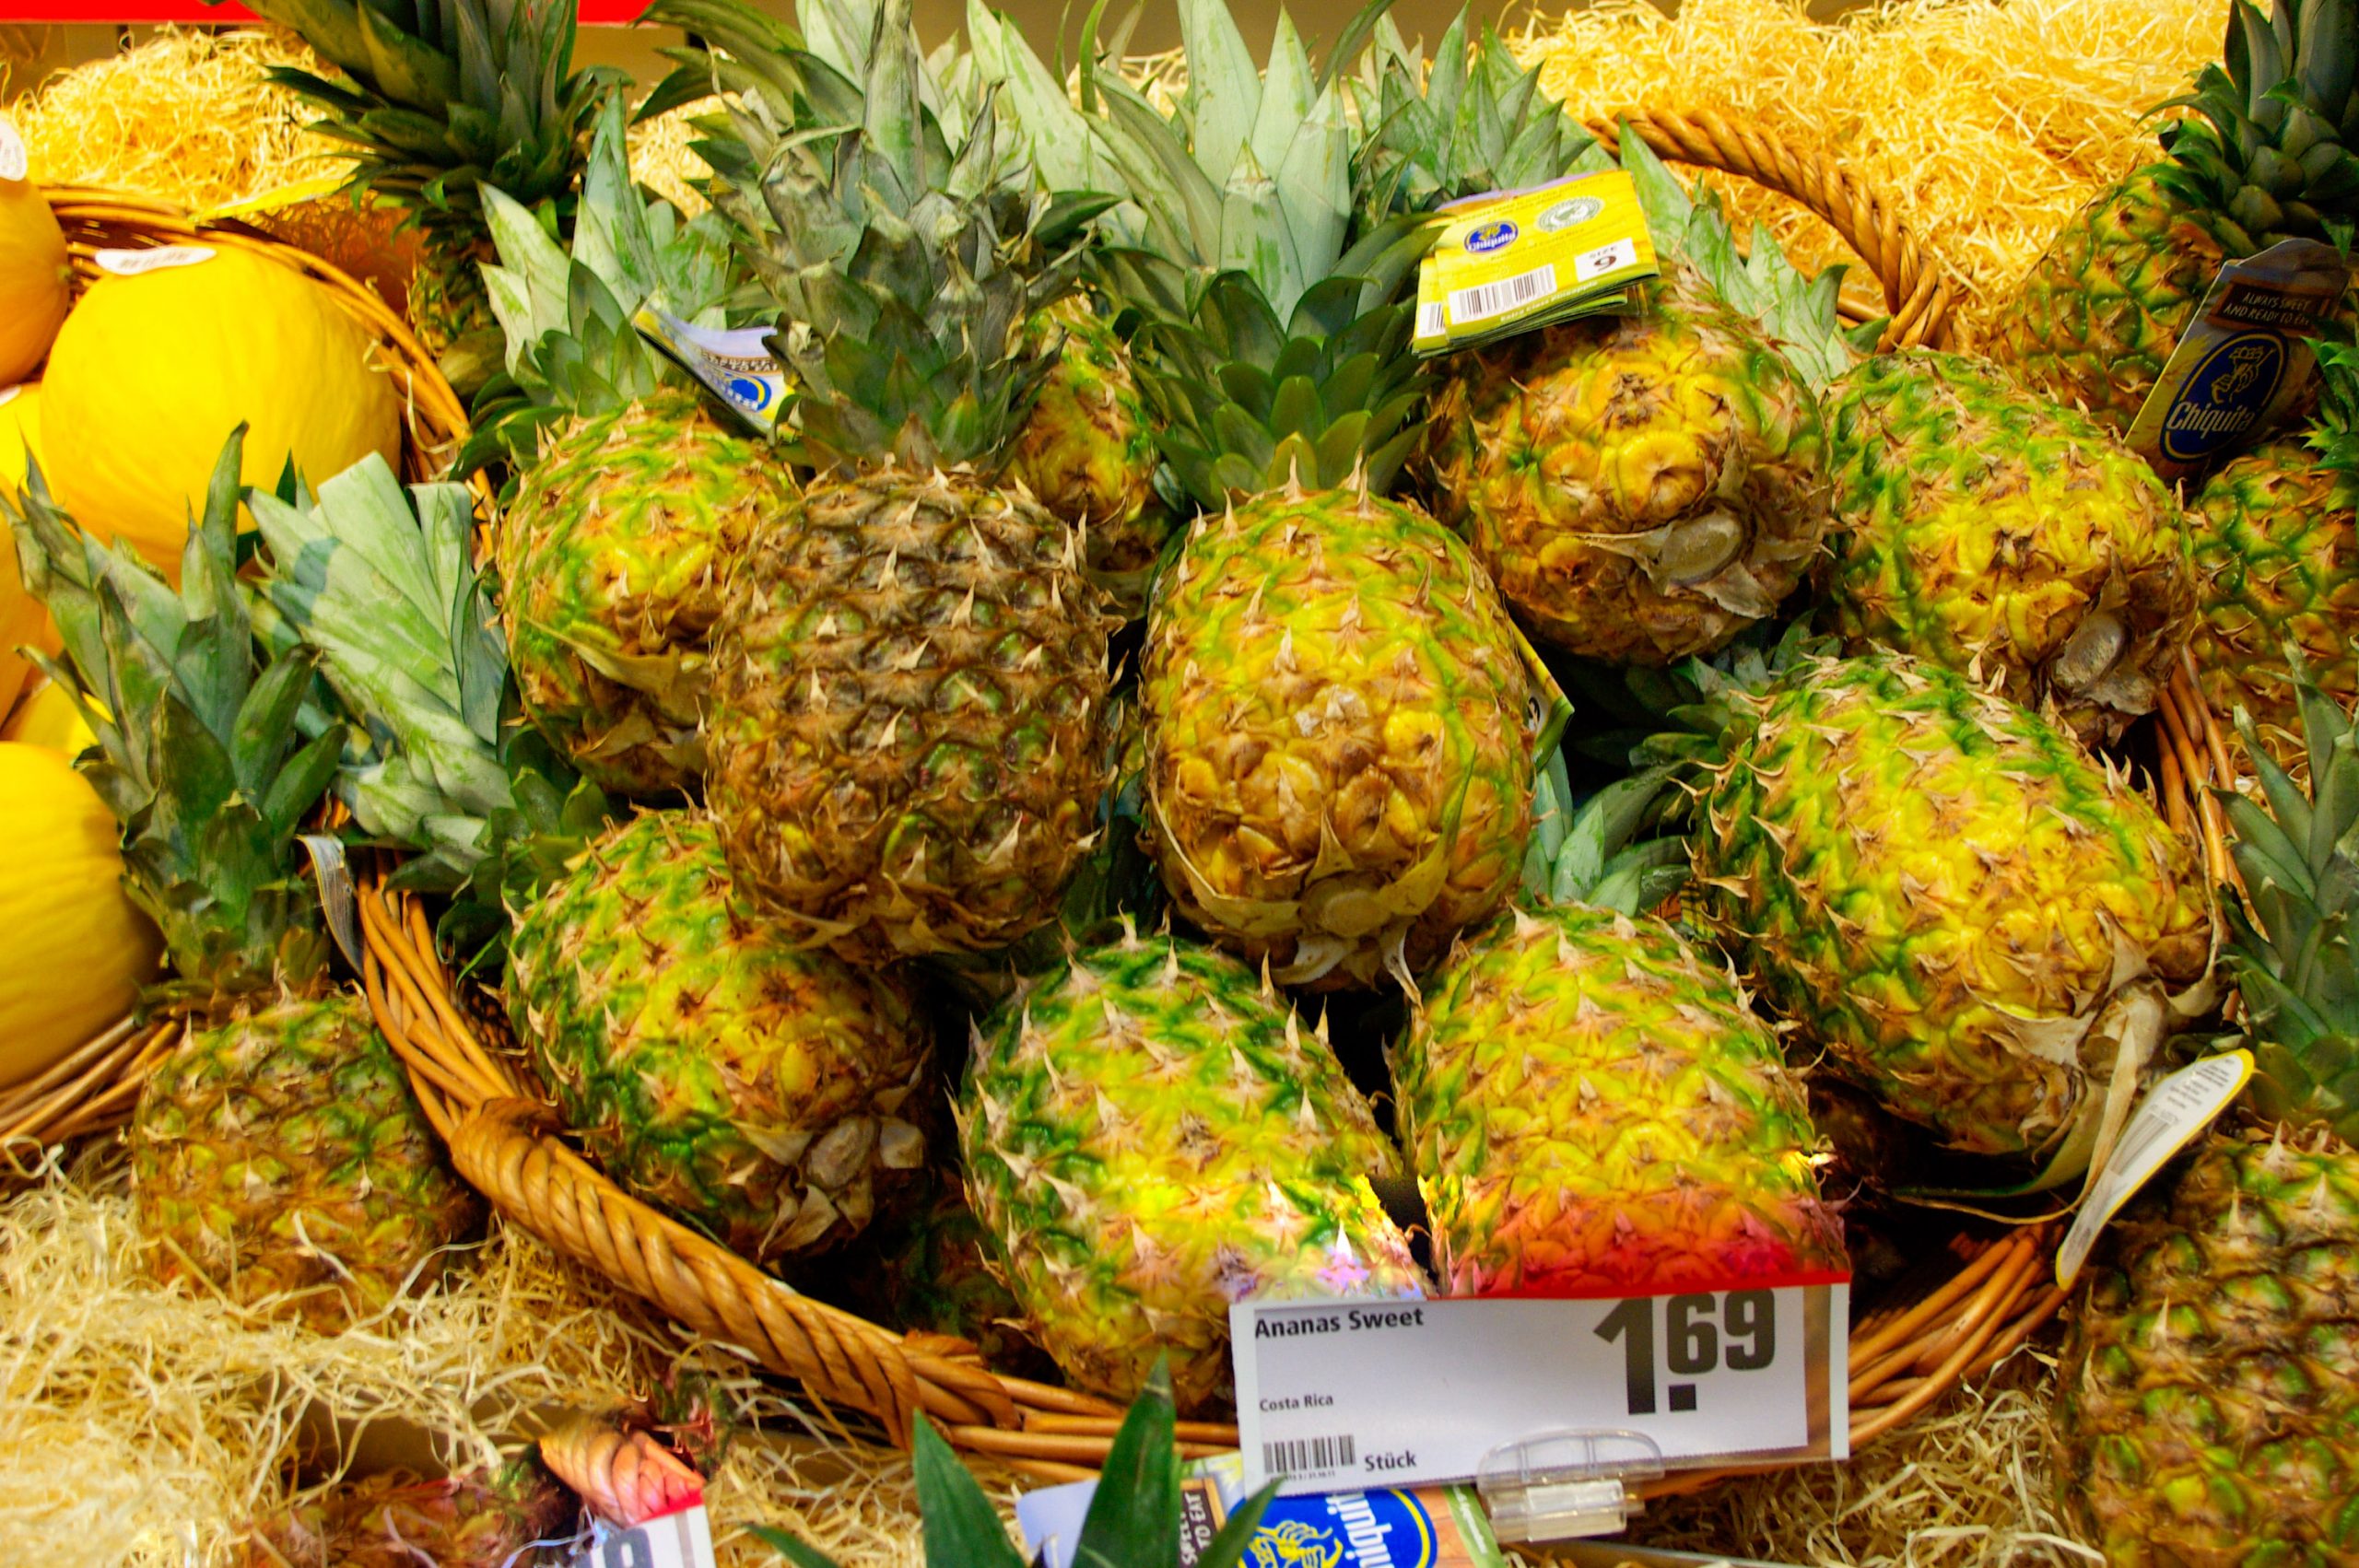 Pineapples on special offer are expensive for people and the environment